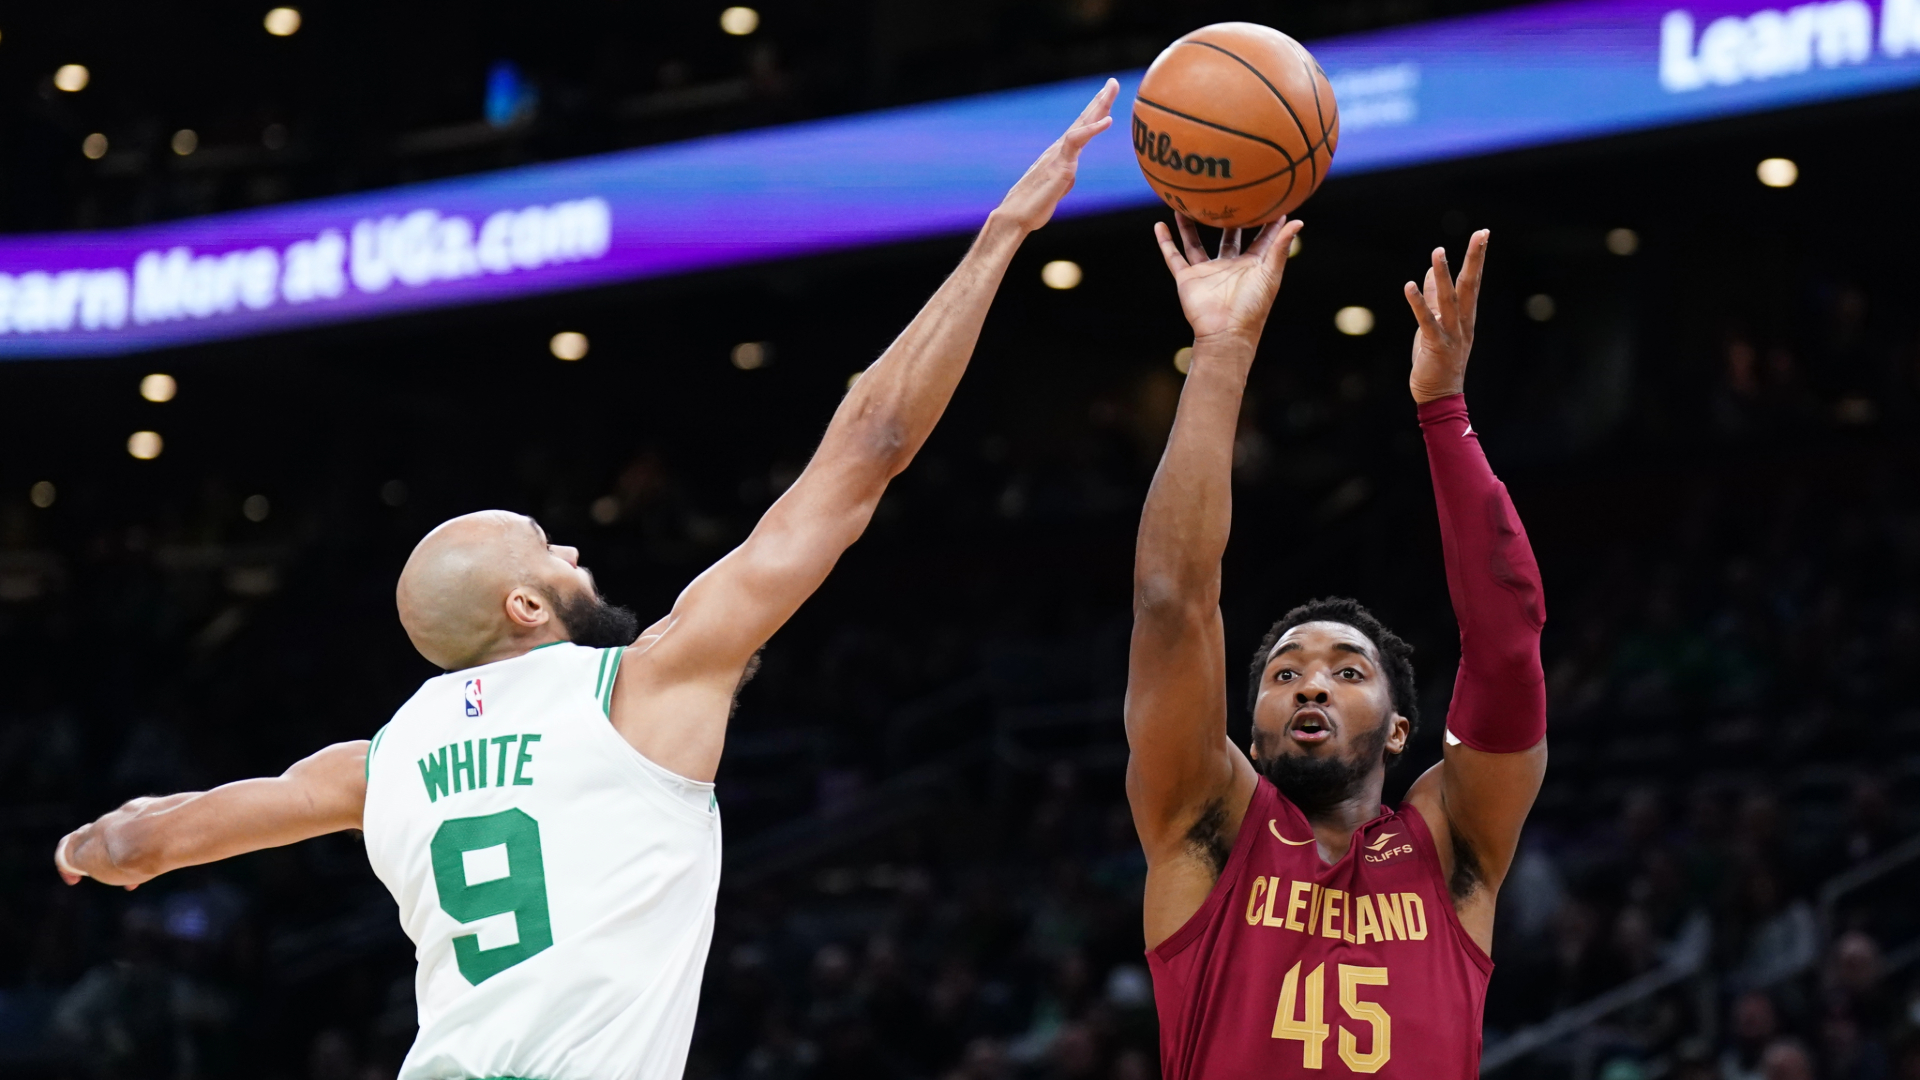 What To Expect From Cavaliers In Round 2 Playoff Matchup Vs. Celtics